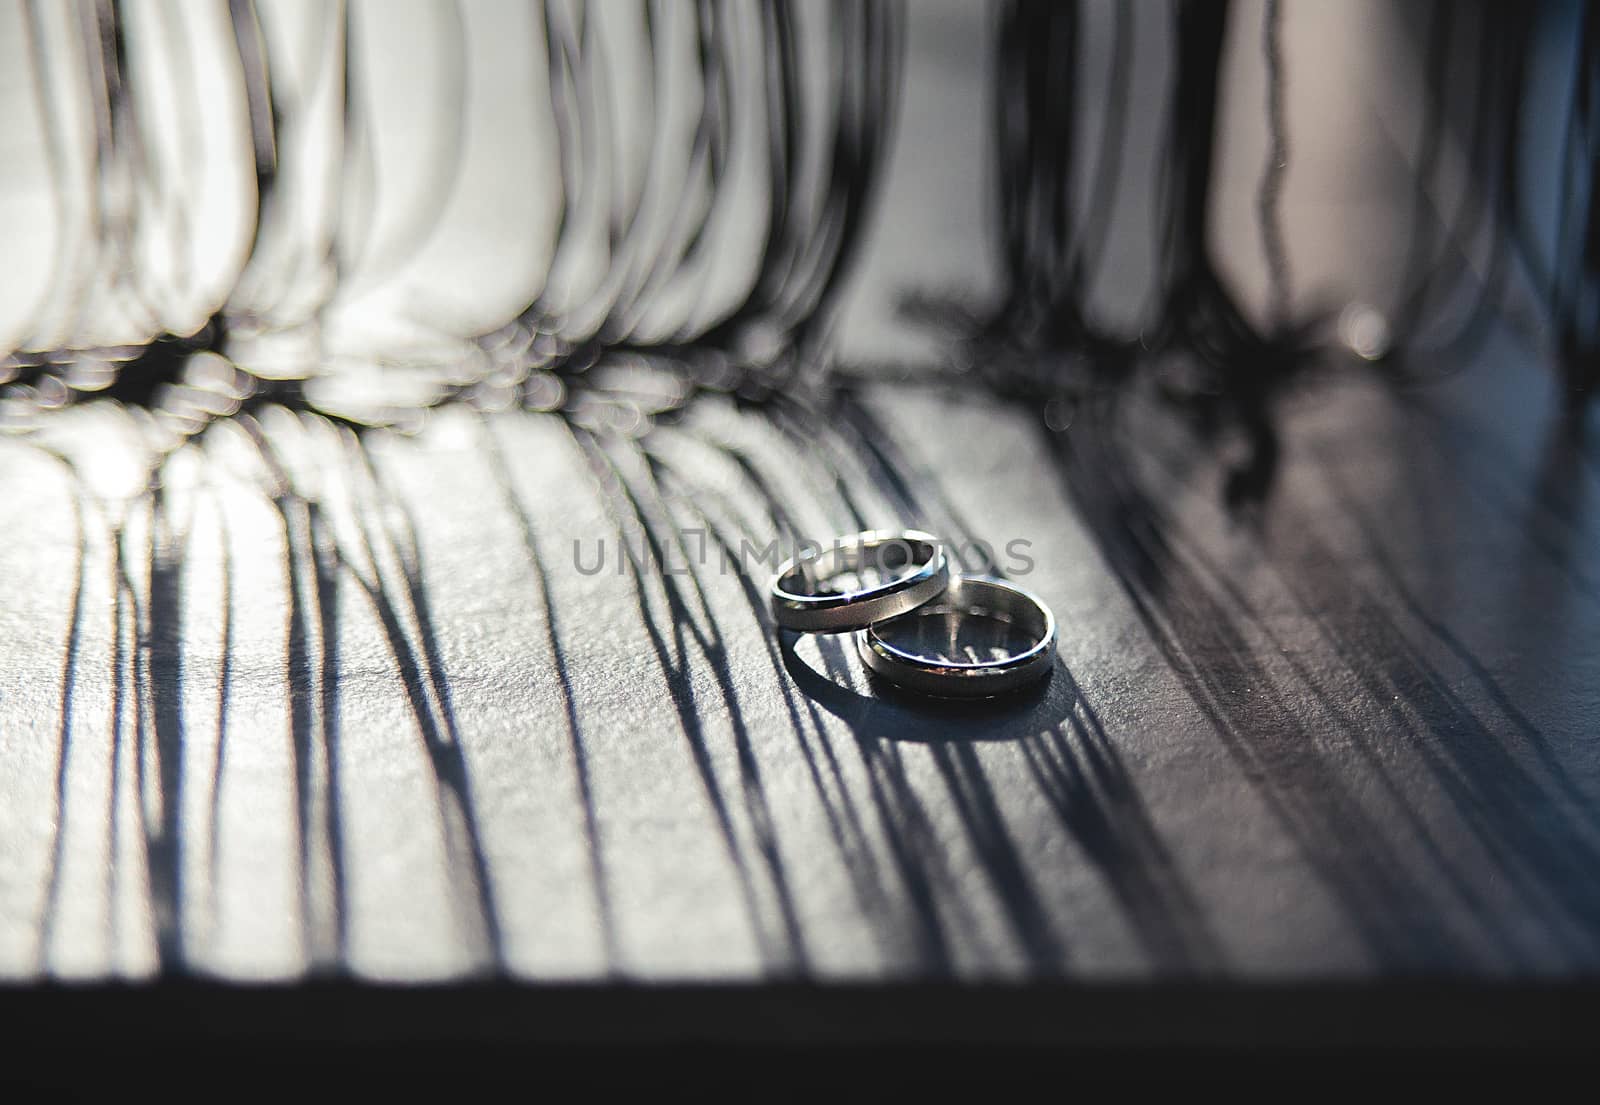 Wedding rings on a wooden board, with long shadows from drapery.